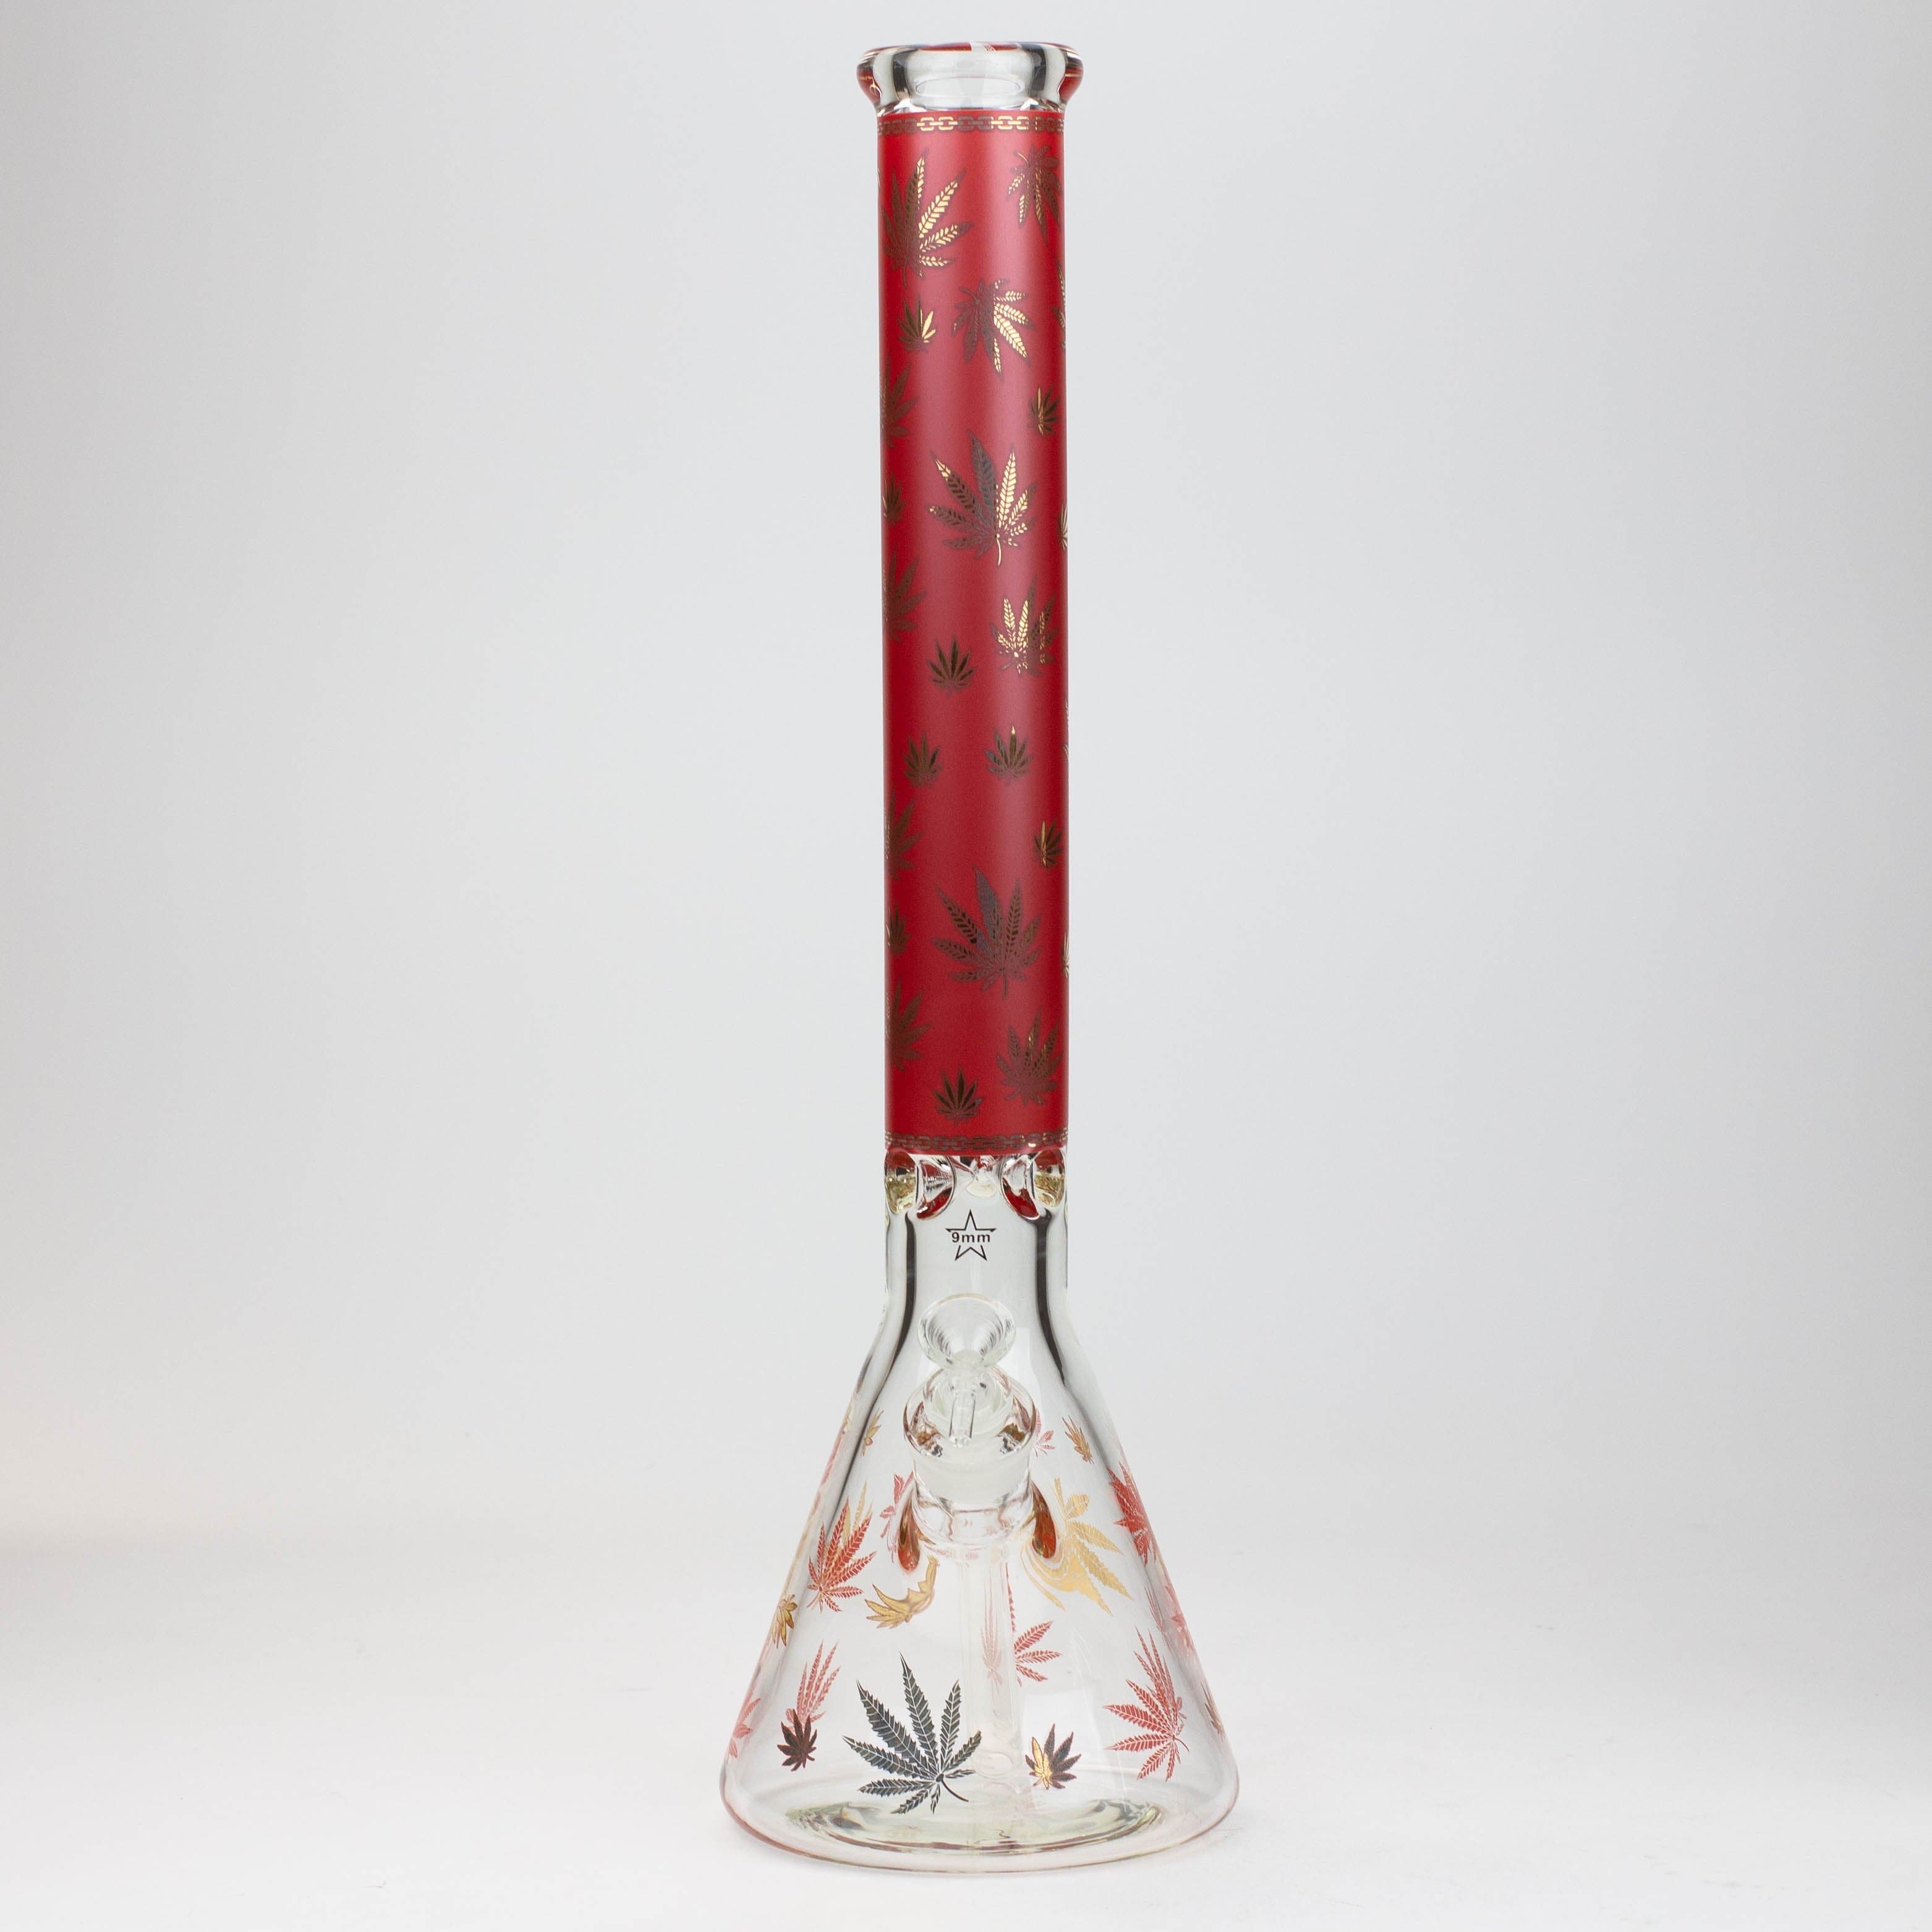 Gold leaf 9 mm glass water pipes 19.5"_13